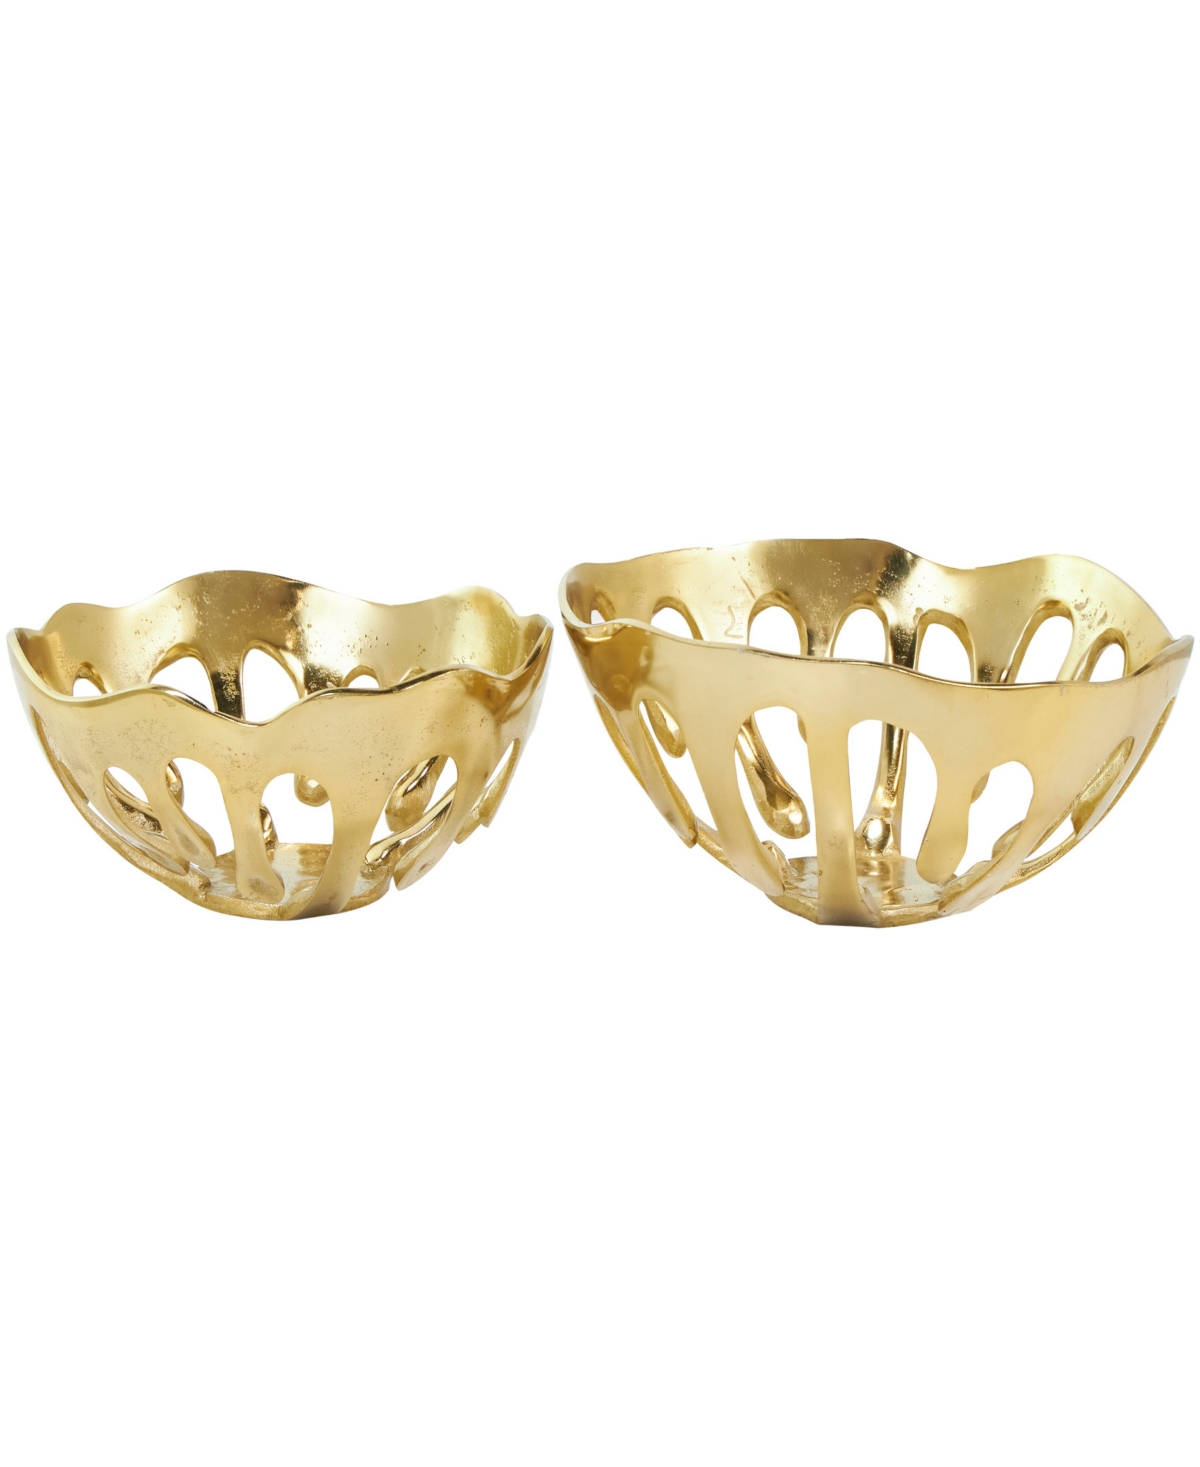 Aluminum Drip Decorative Bowl with Open Frame Design, Set of 2 - 13", 11" H - Gold